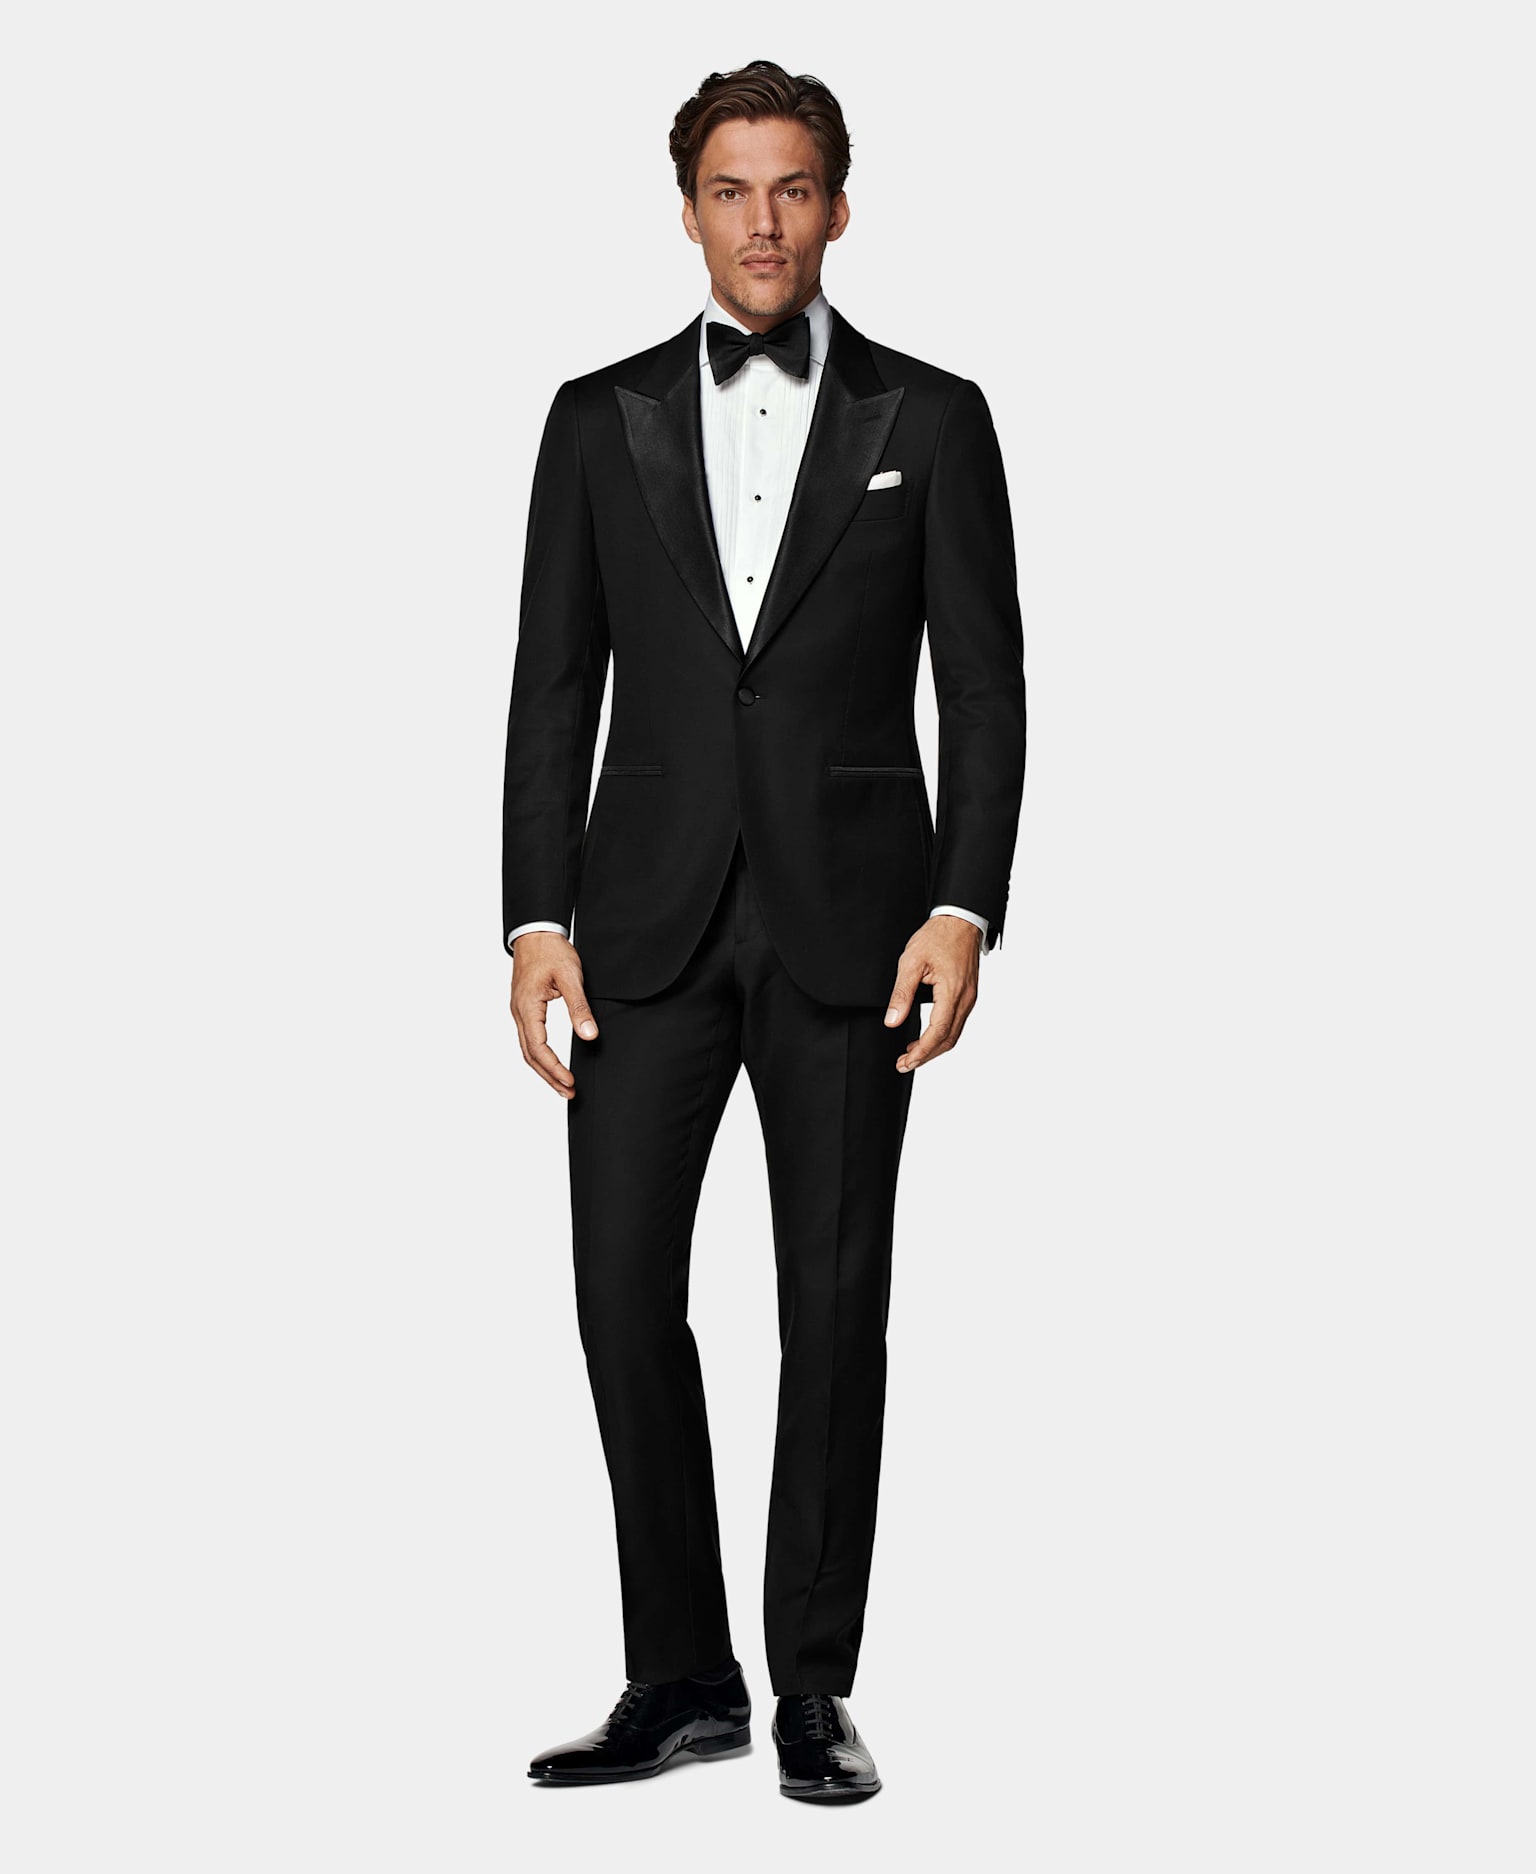 Black tuxedo with pleated white shirt, white pocket square, and black silk bow tie.